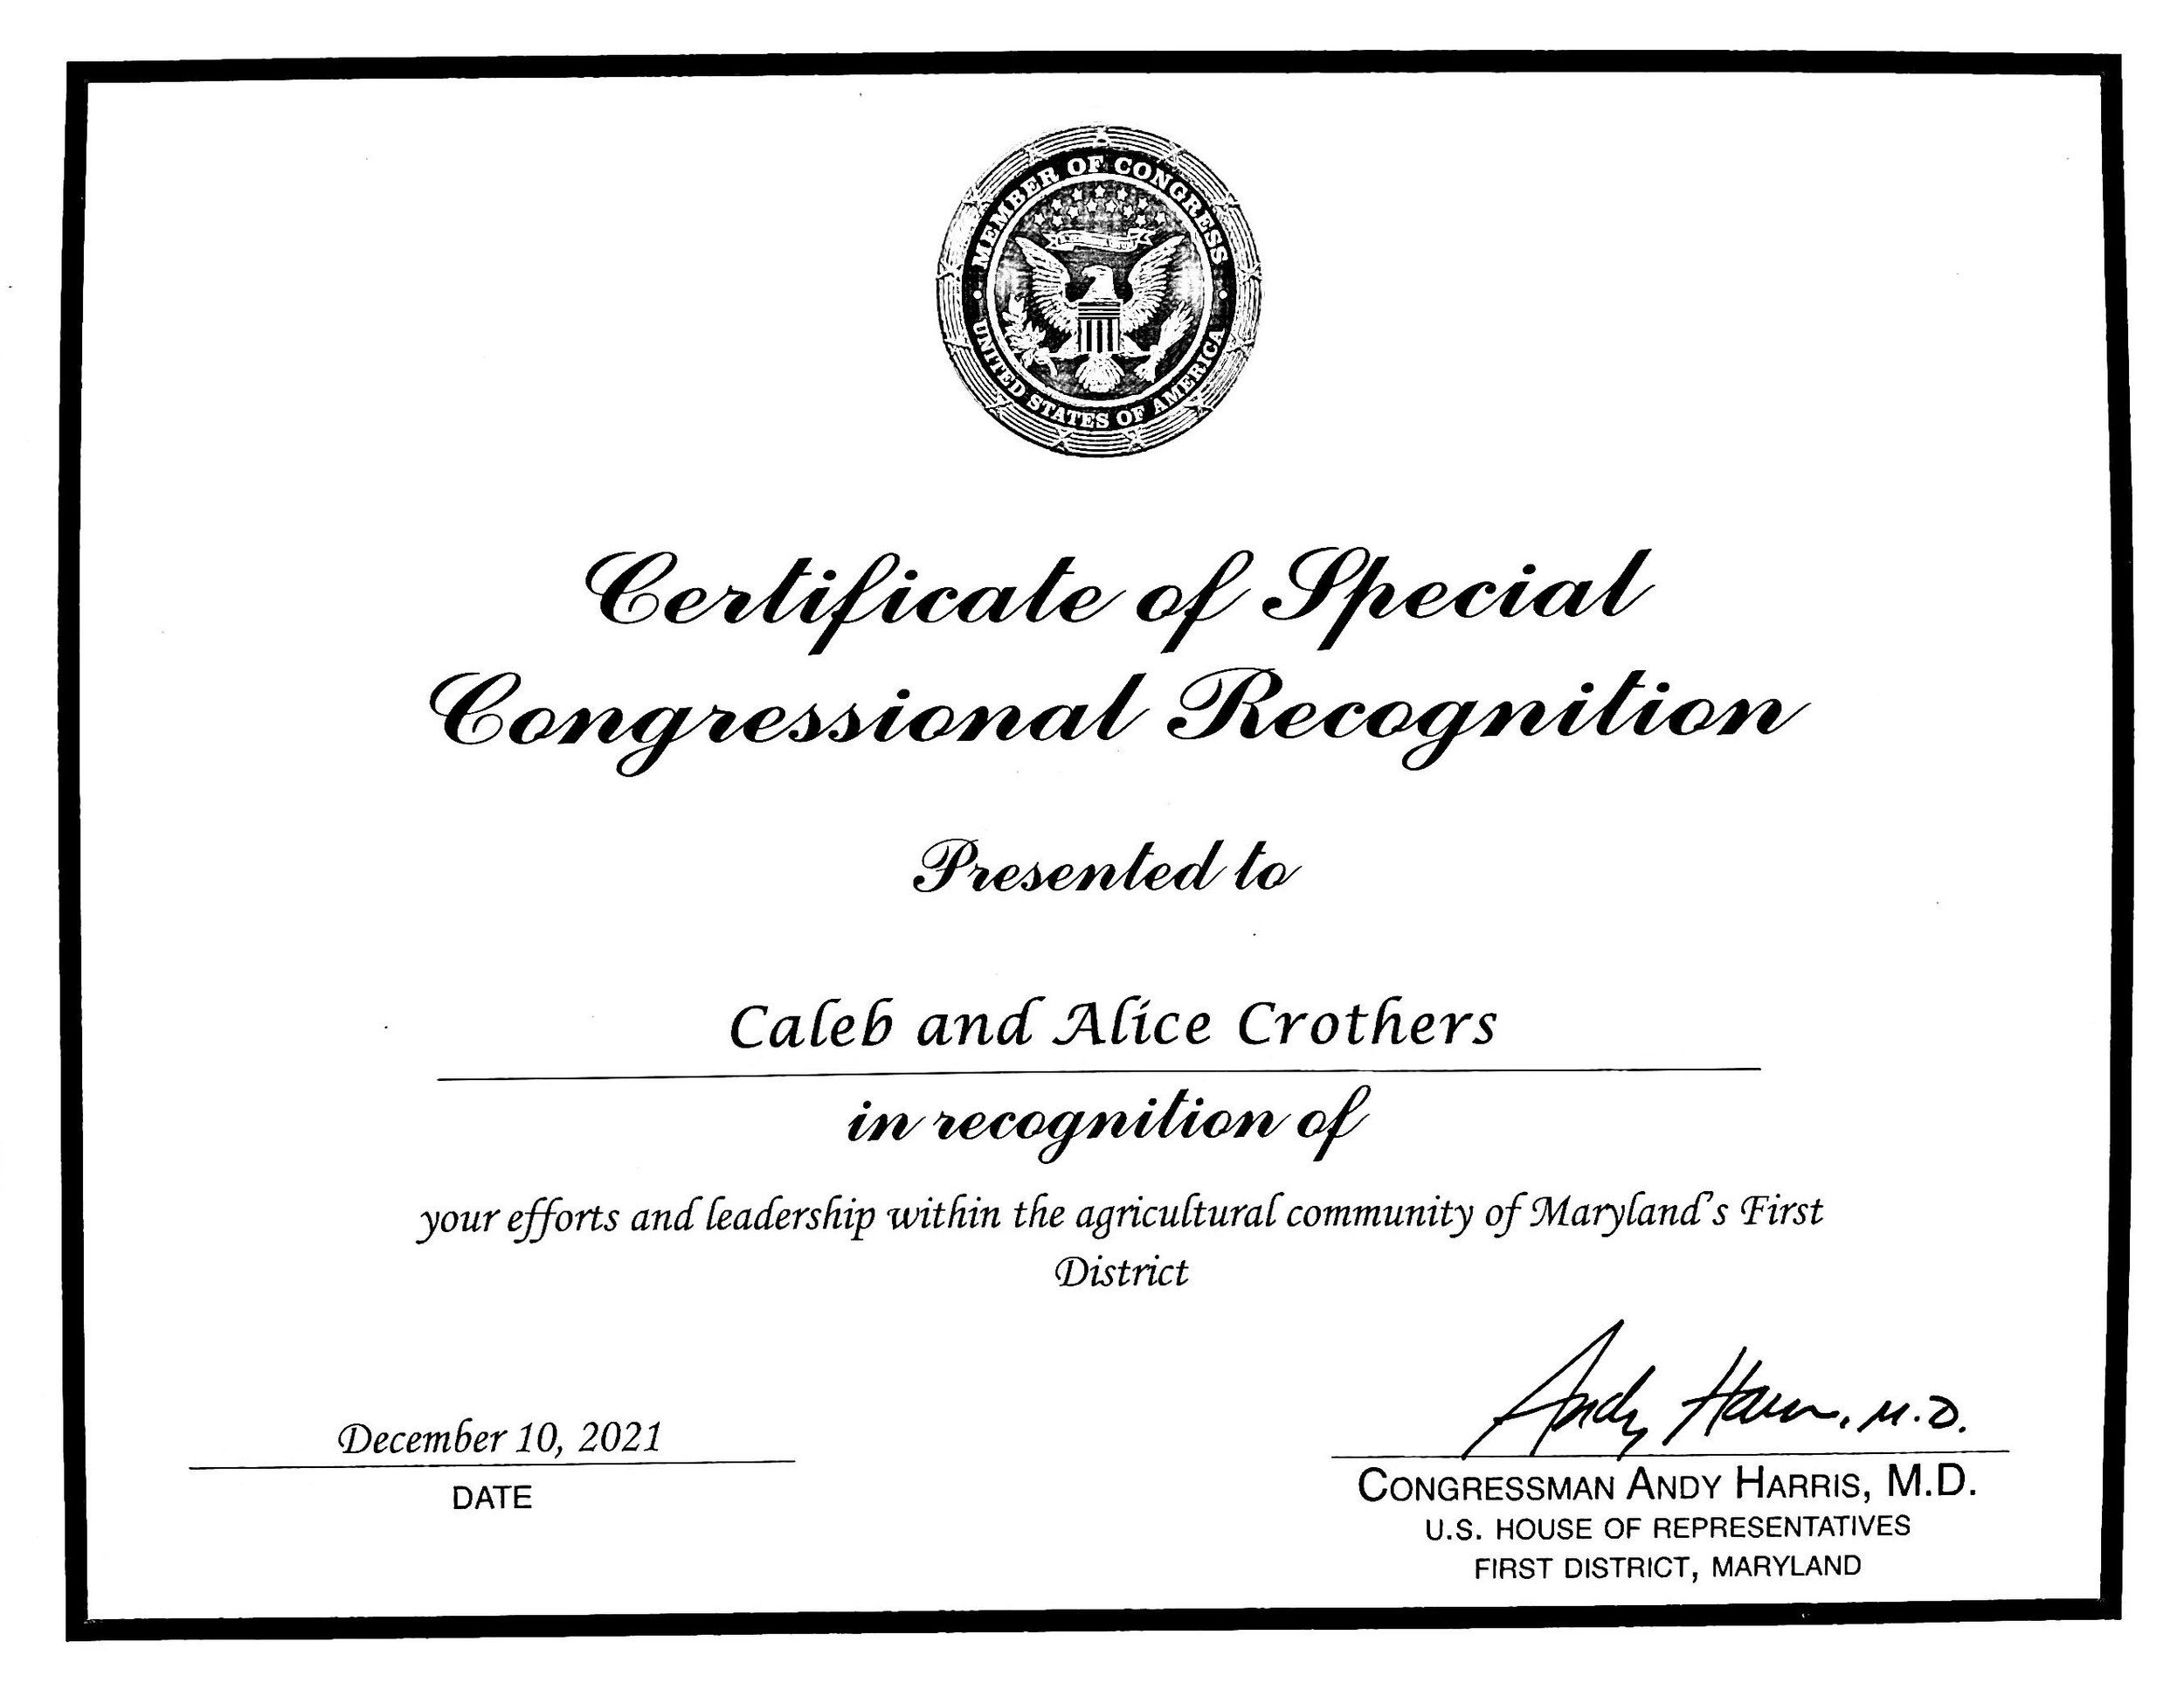 A close of the Certificate of Congressional Recognition